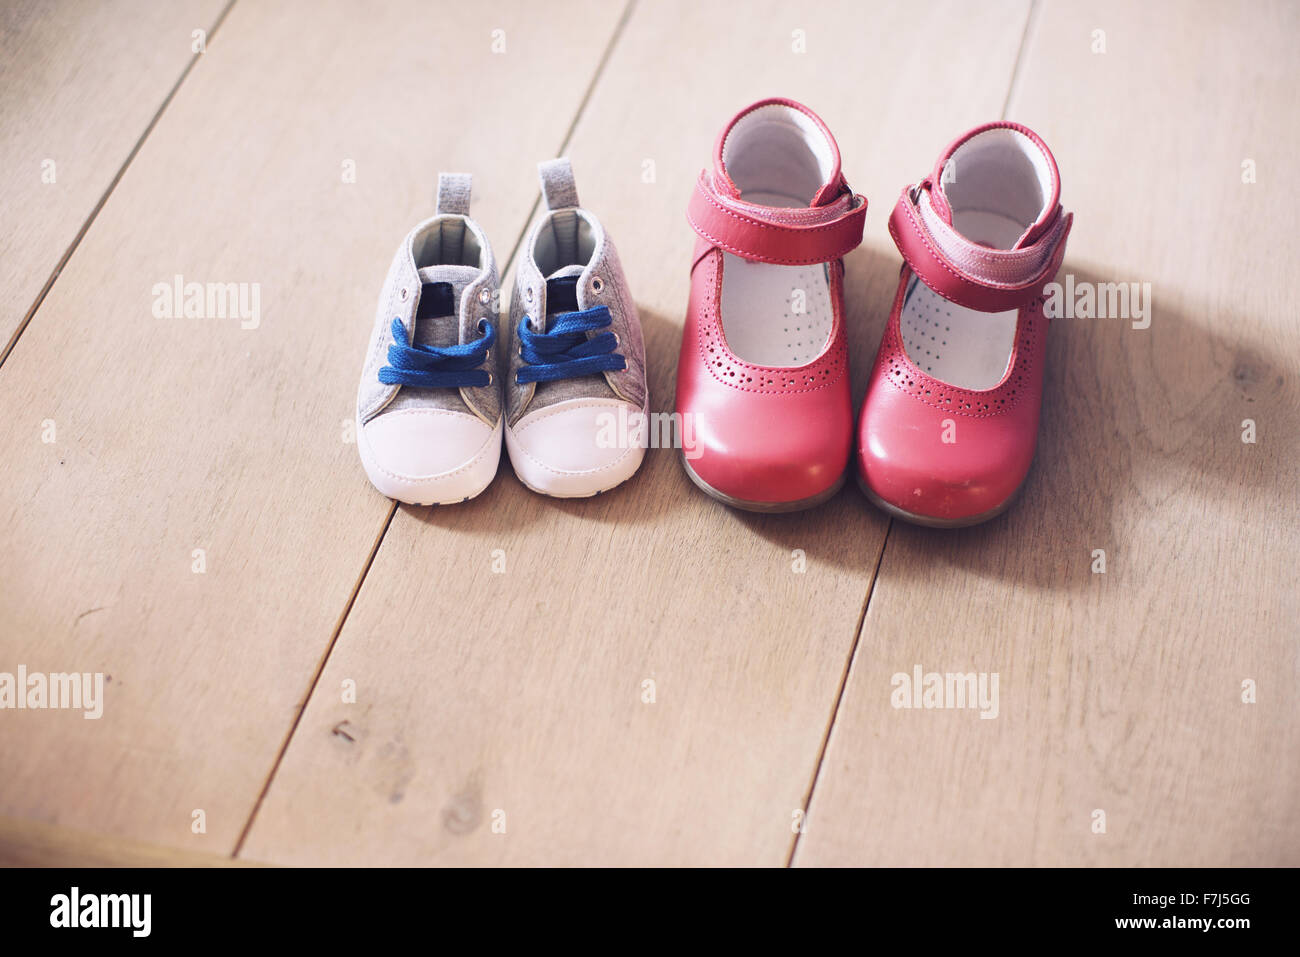 Children's shoes side by side on floor Stock Photo